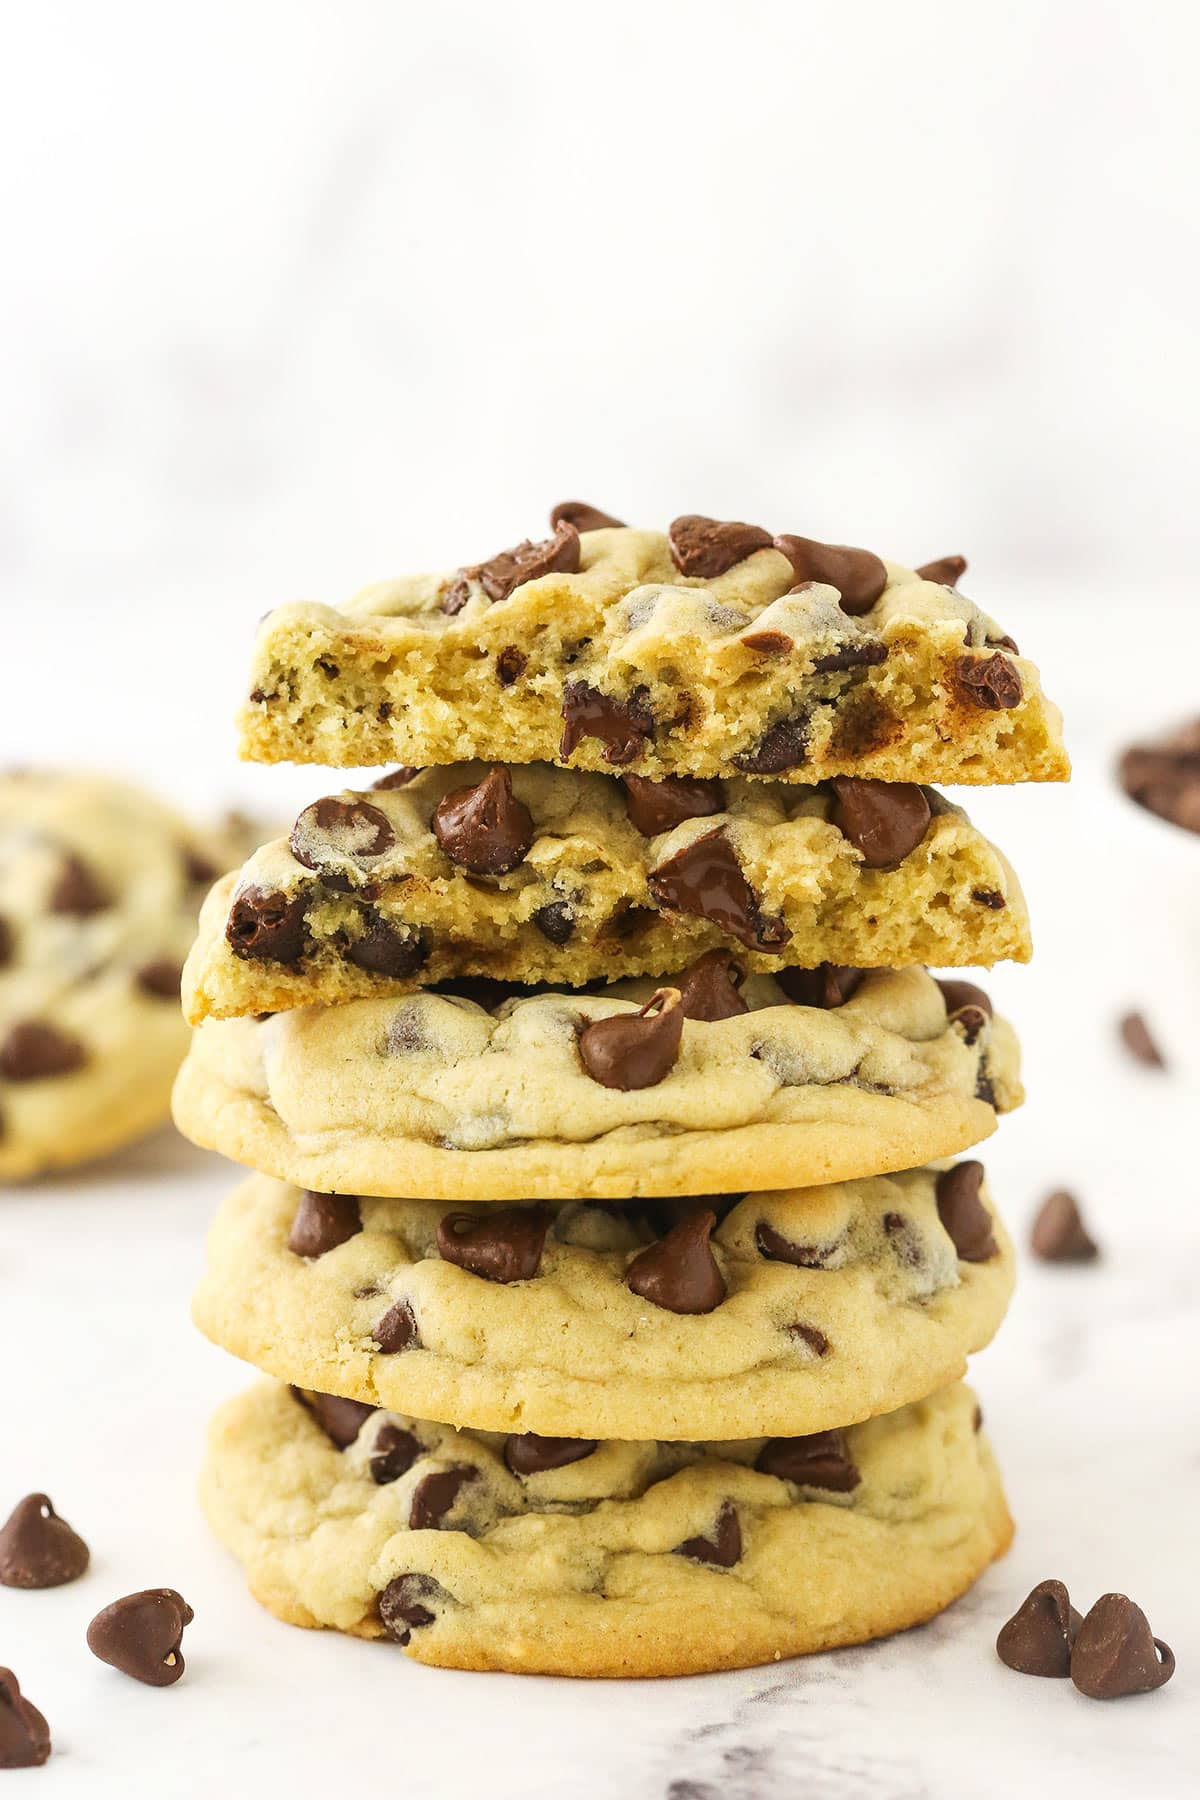 A pile of three chocolate chip cookies with two cookie halves balanced on top.